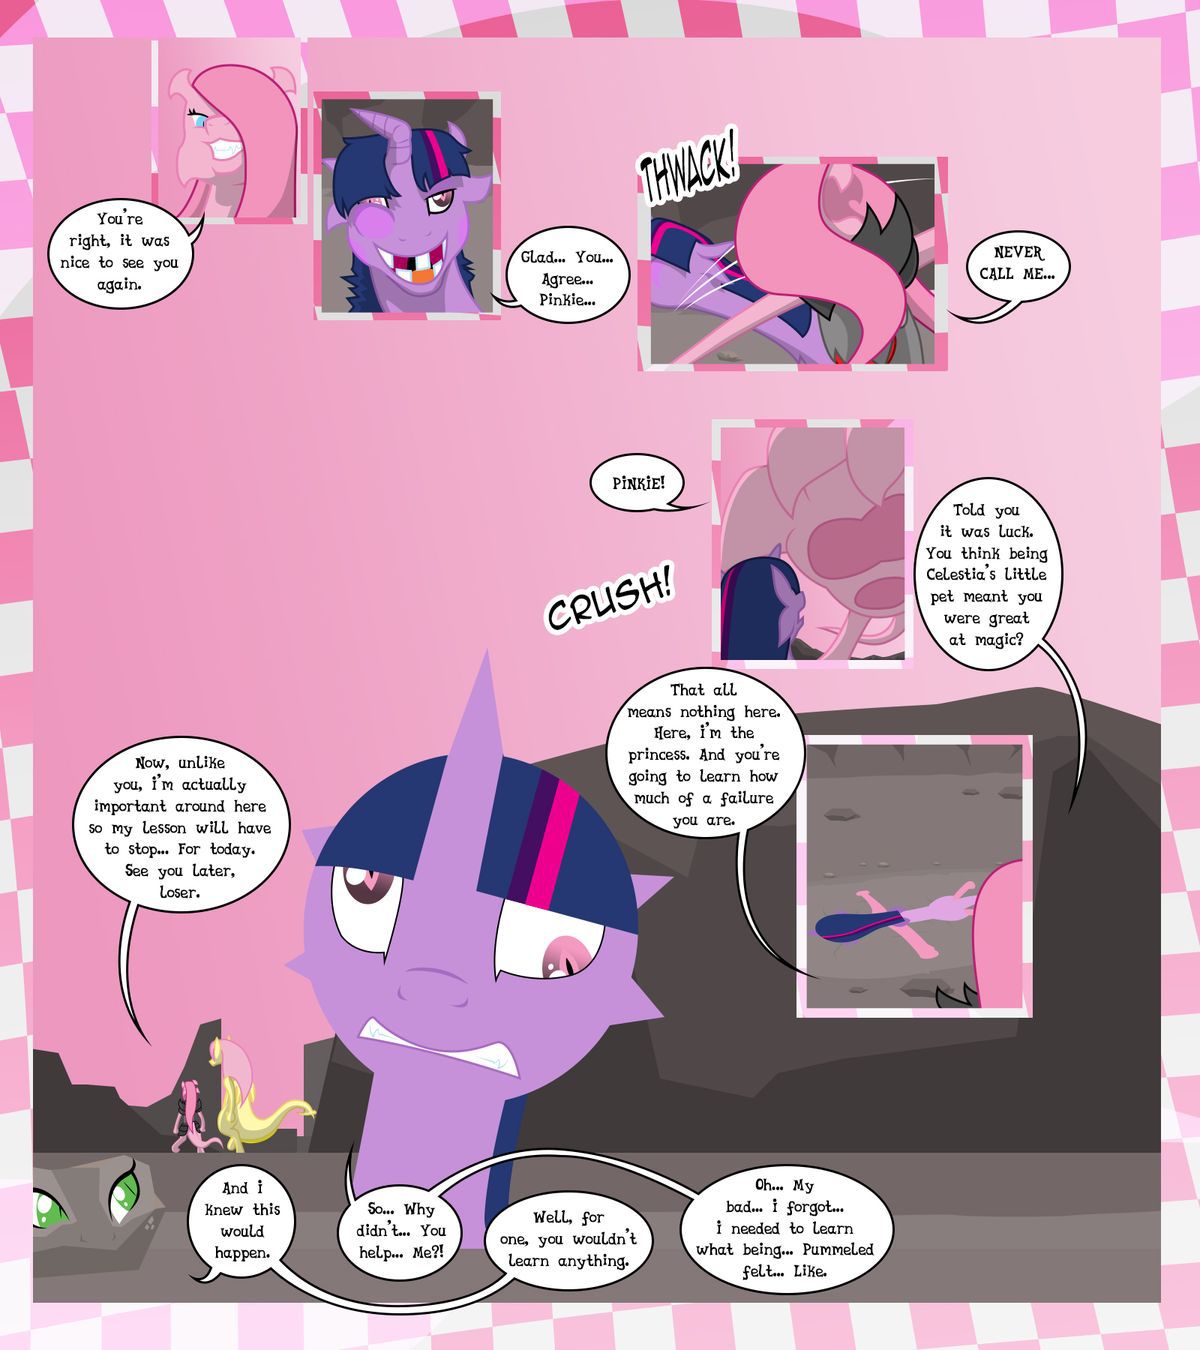 [GatesMcCloud] Cutie Mark Crusaders 10k: Chapter 3 - The Lost (My Little Pony: Friendship is Magic) [English] [Ongoing] 60